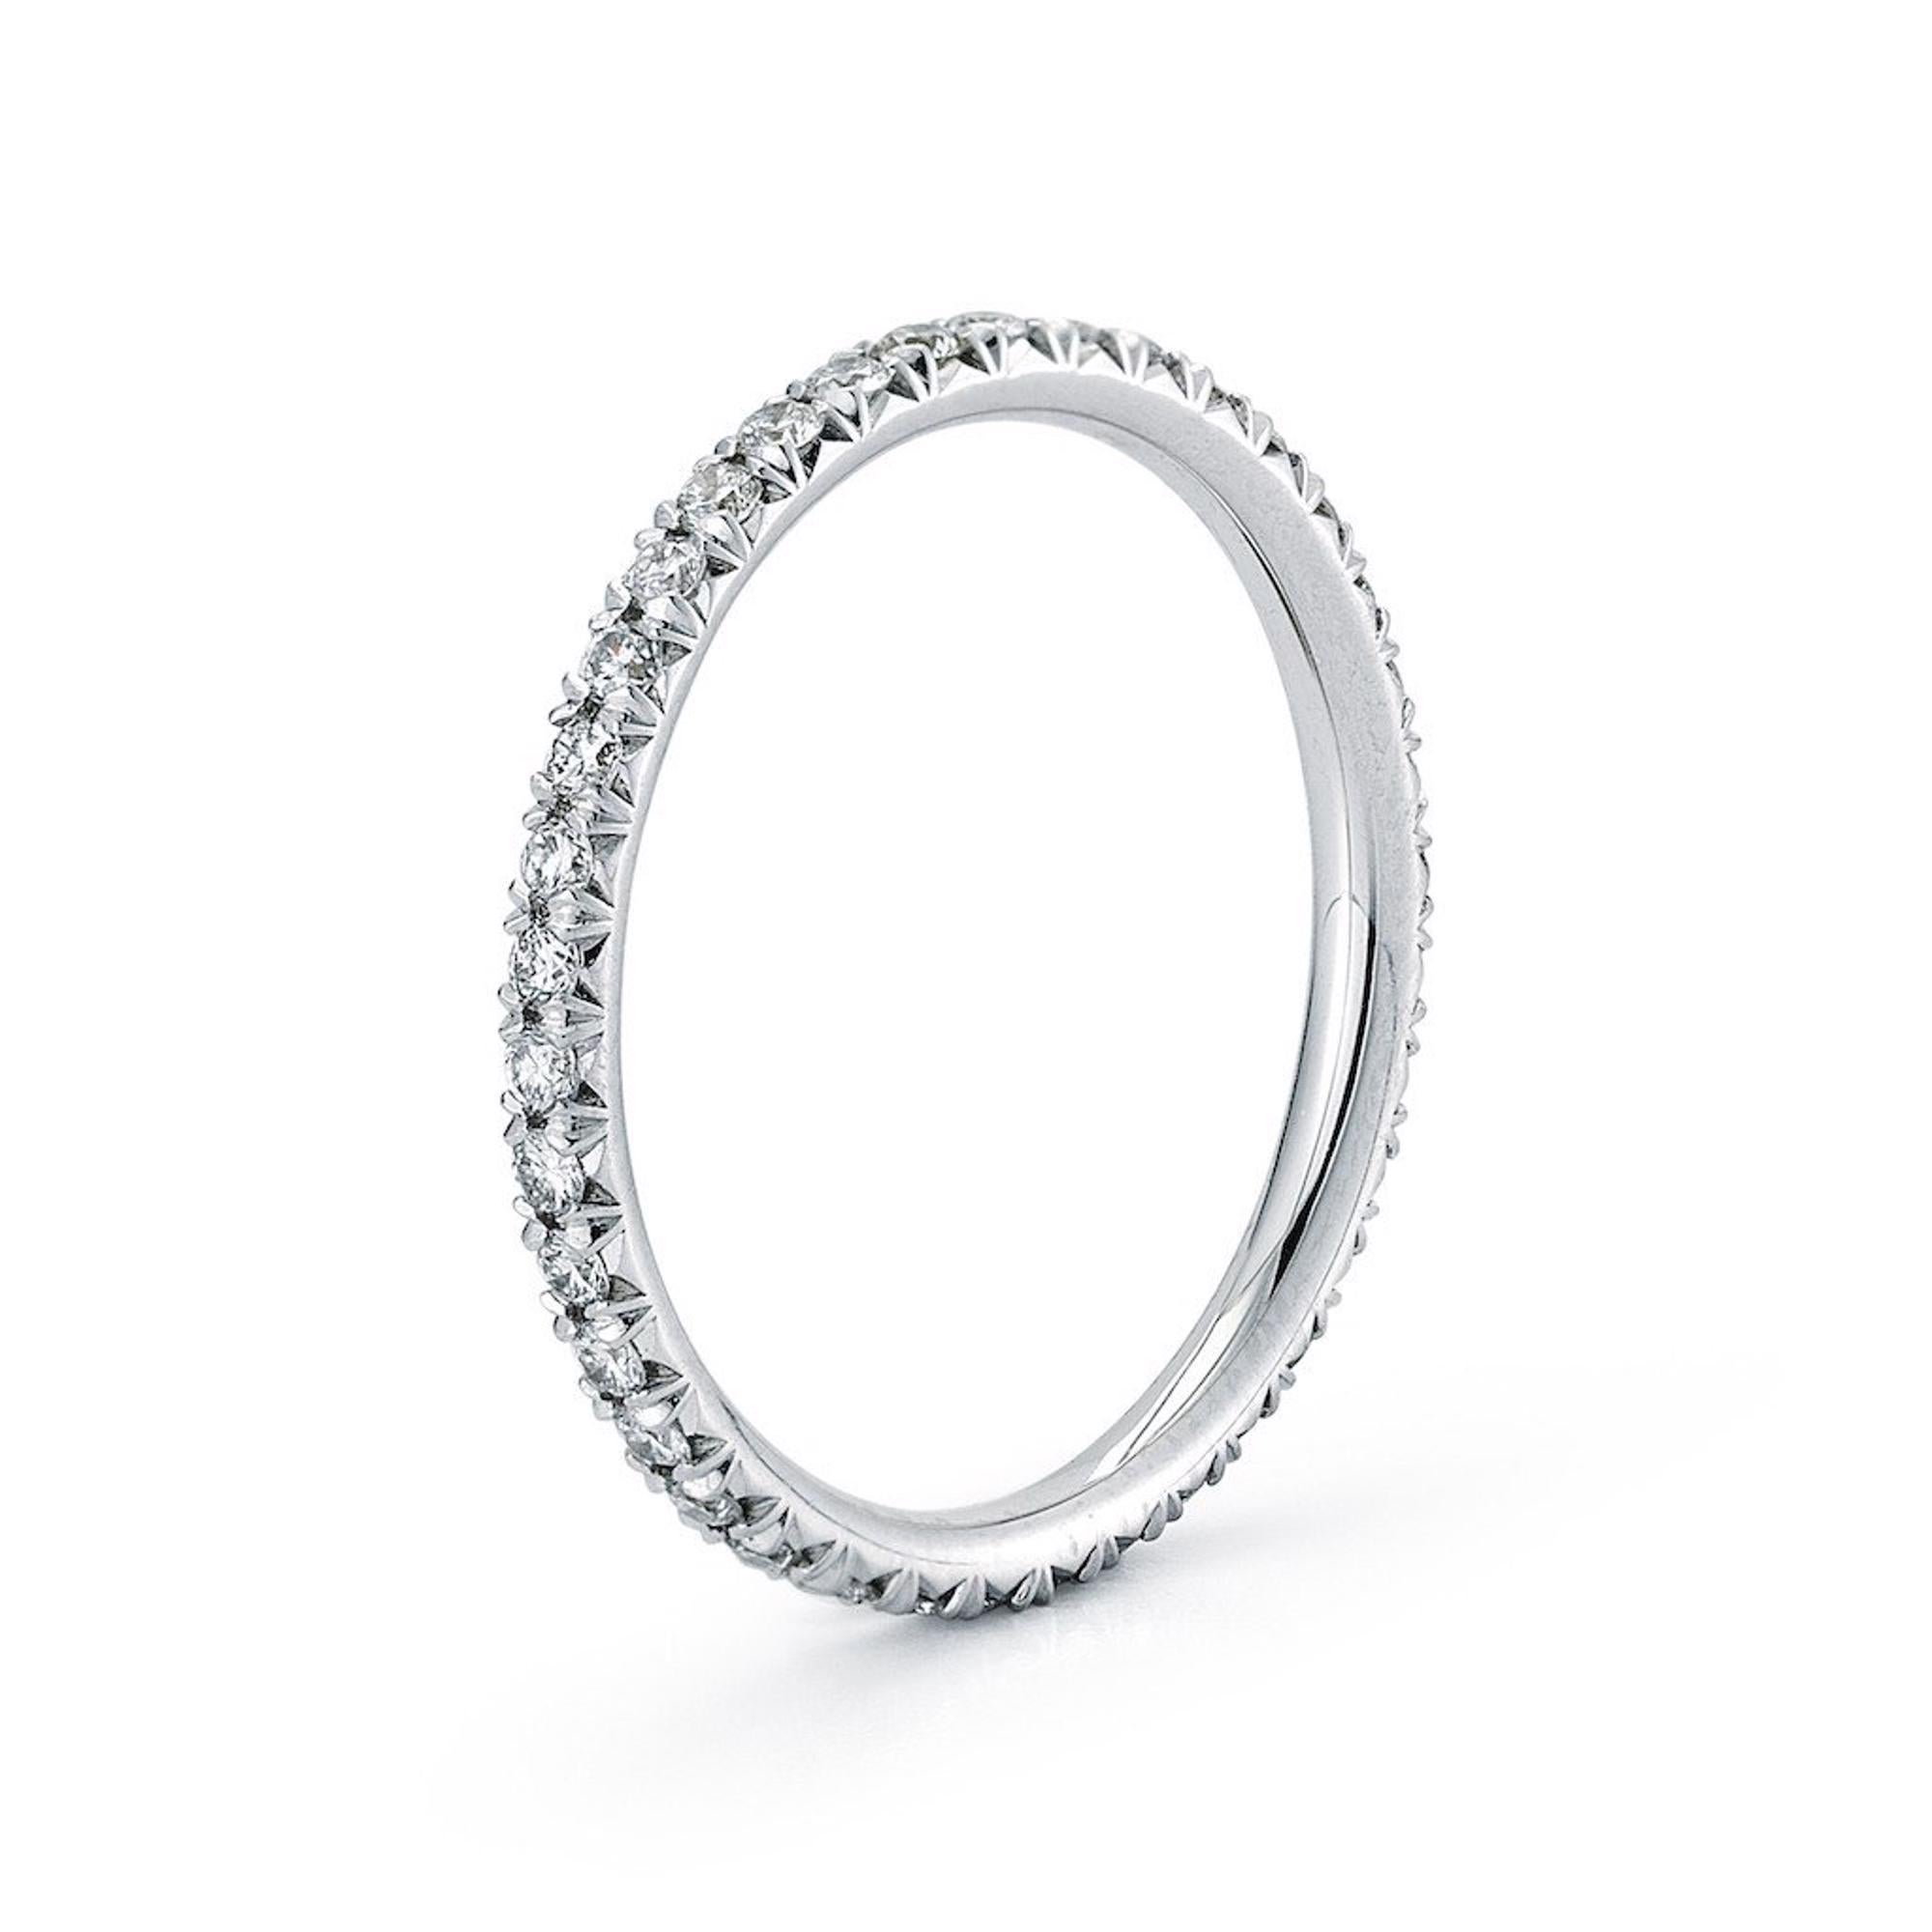 Beautiful diamond pave ring with amazing quality handset diamonds in a full circle mounted in 18k white gold. Diamonds are F-G color and VVS-VS clarity with an appraisal of authenticity. Total carat weight is 0.45 cttw and width 1.5 mm. Ring size